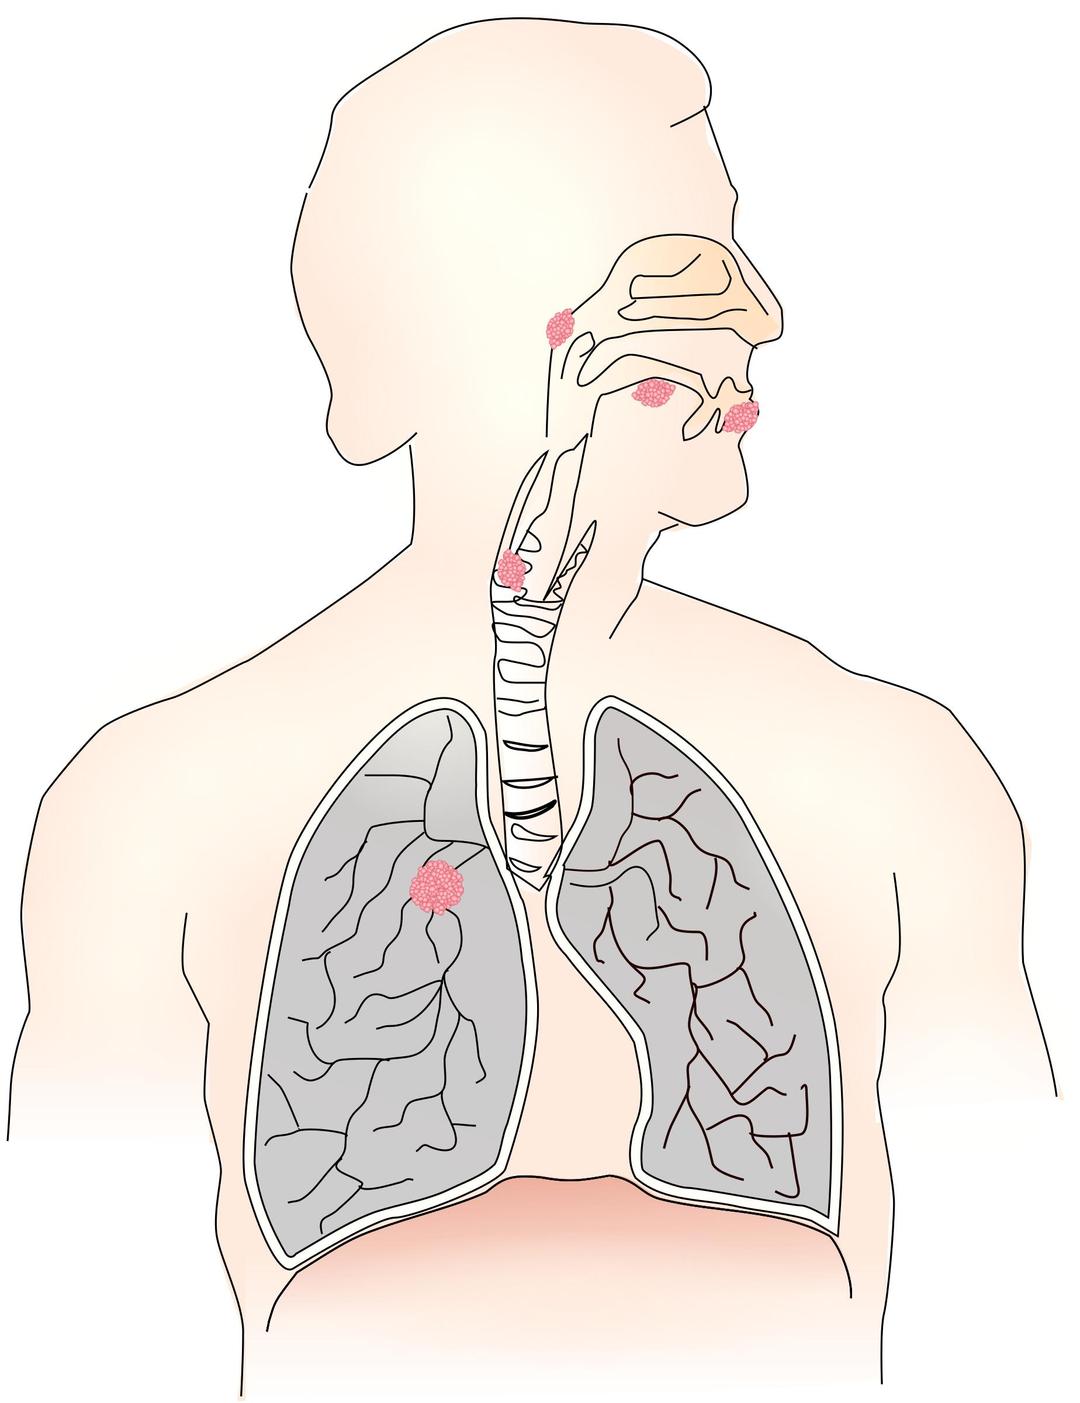 Cancer caused by smoking I png transparent